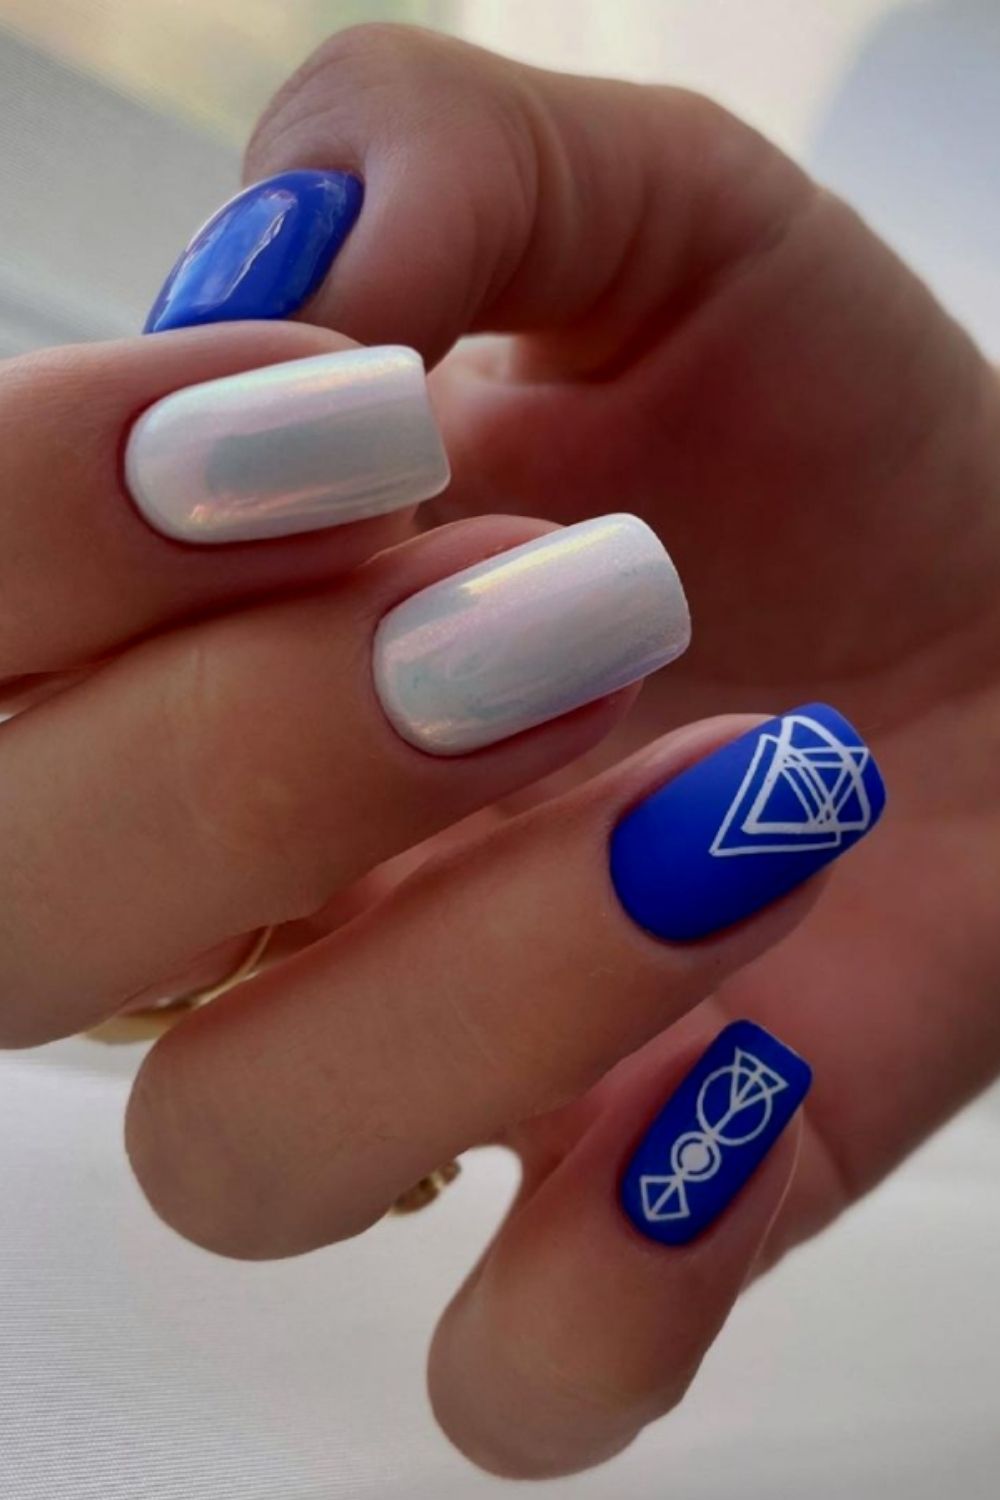 White and blue square nails